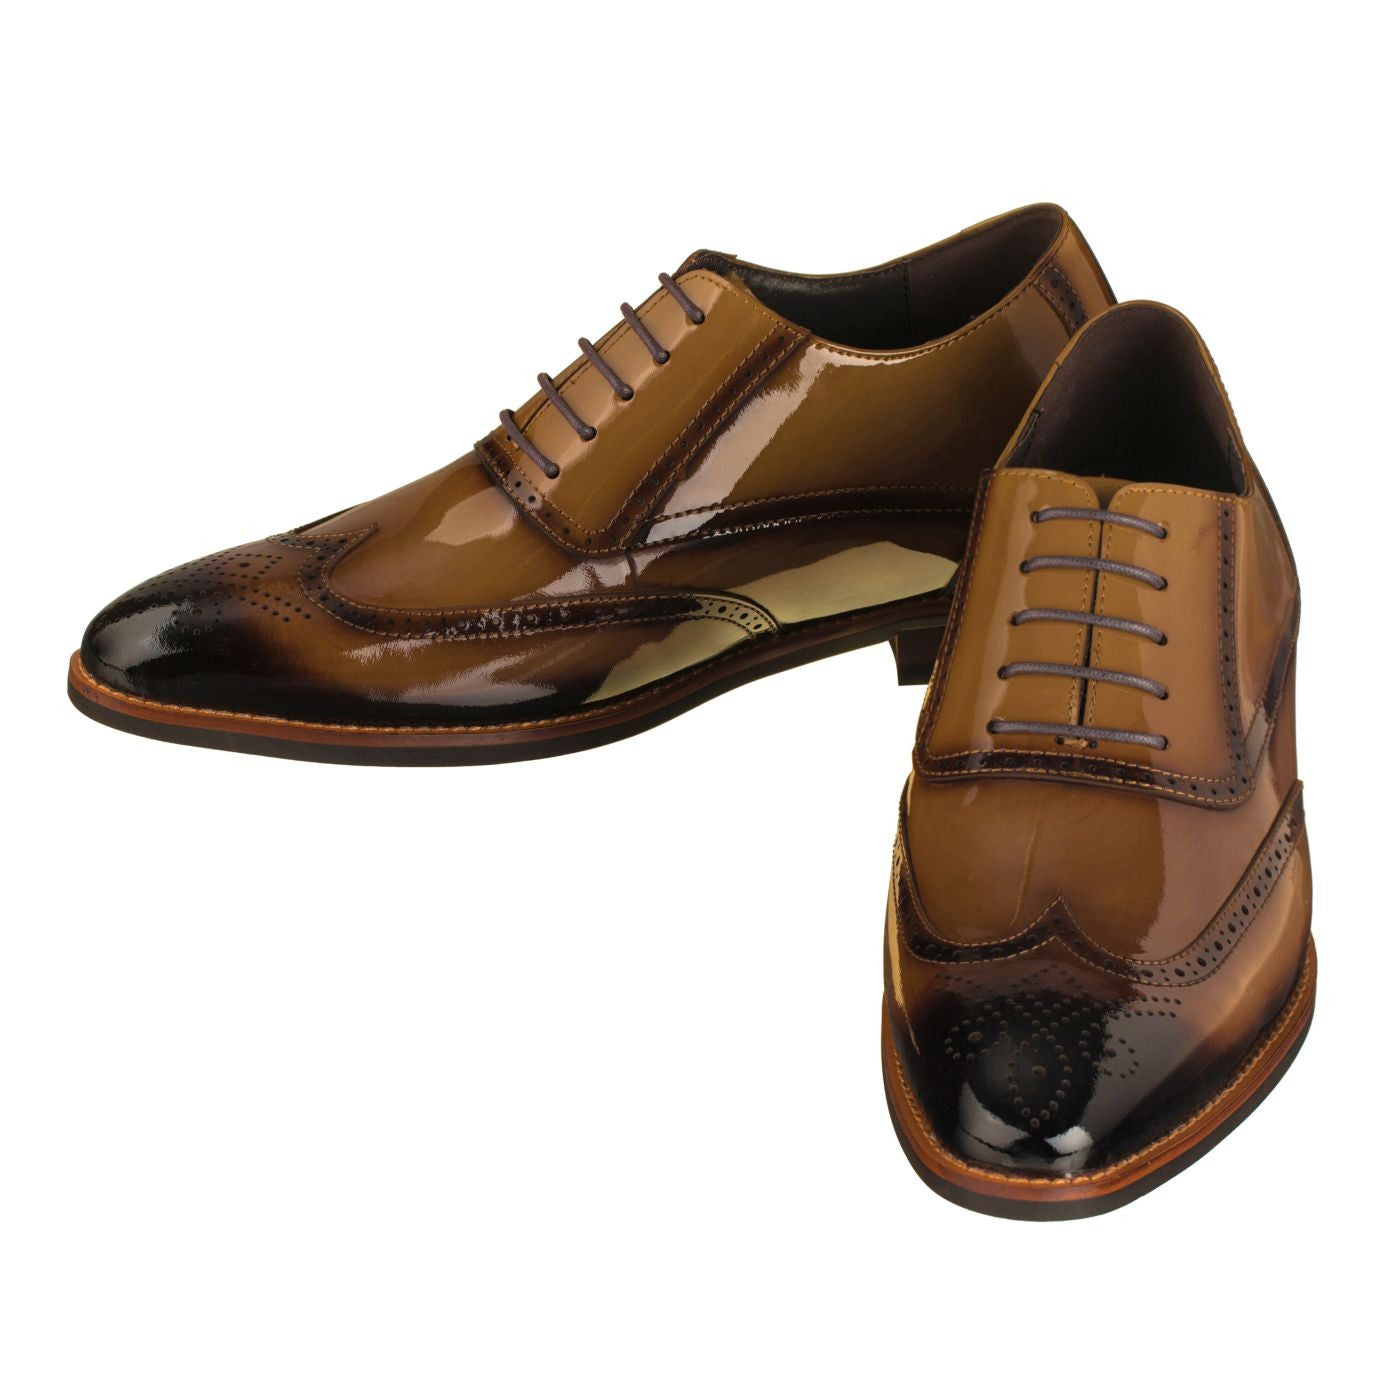 Elevator shoes height increase CALTO - S1017 - 3.0 Inches Taller (Dark Brown Patent Leather)